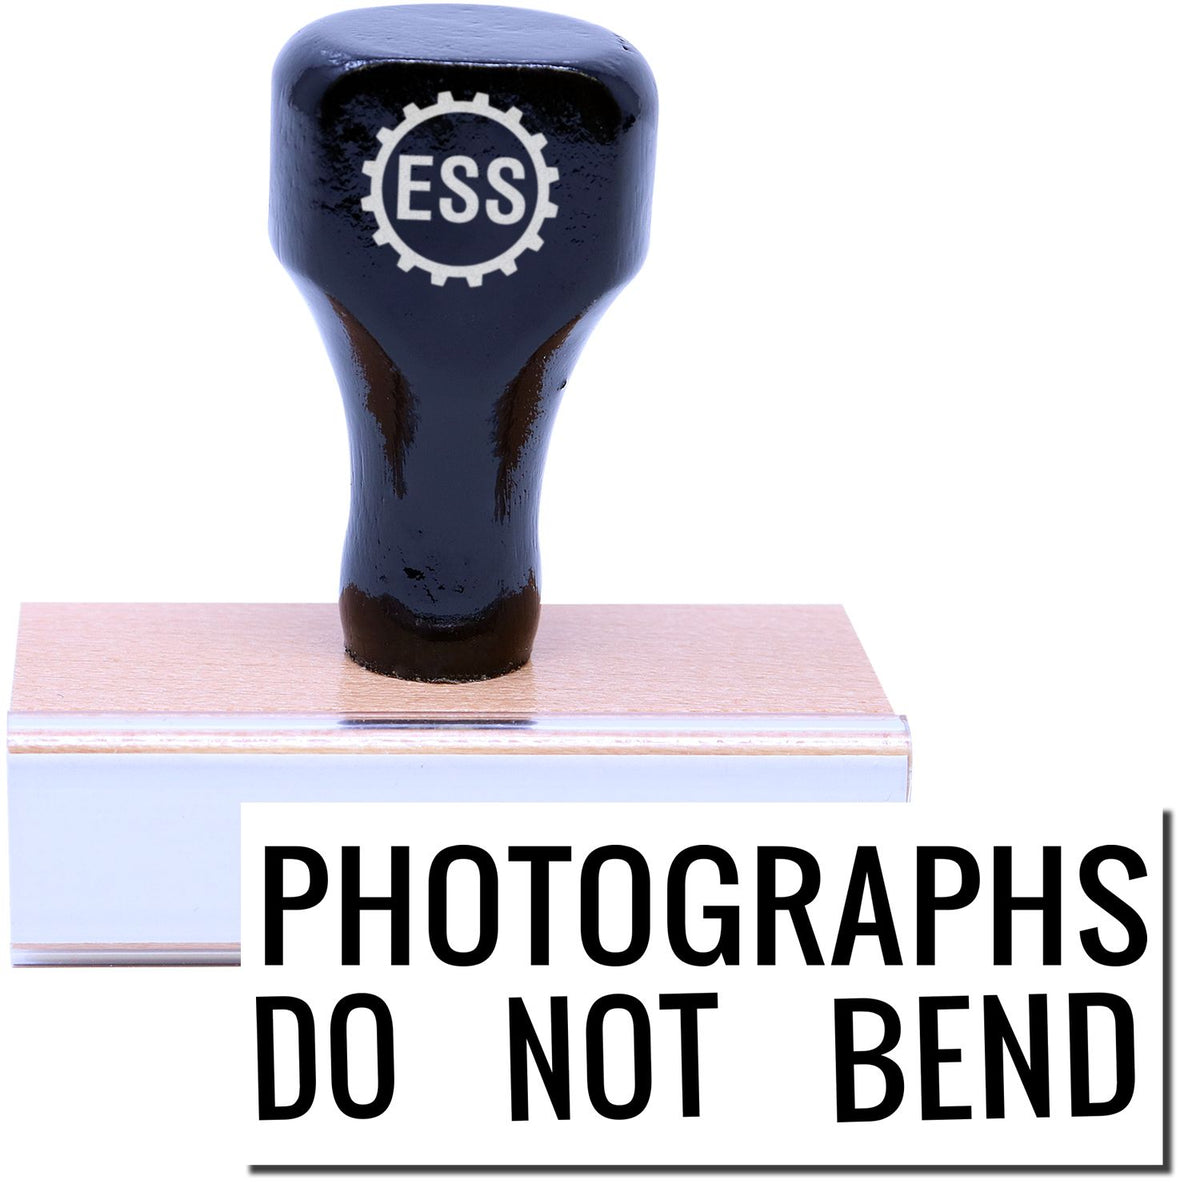 A stock office rubber stamp with a stamped image showing how the text &quot;PHOTOGRAPHS DO NOT BEND&quot; in a large font is displayed after stamping.